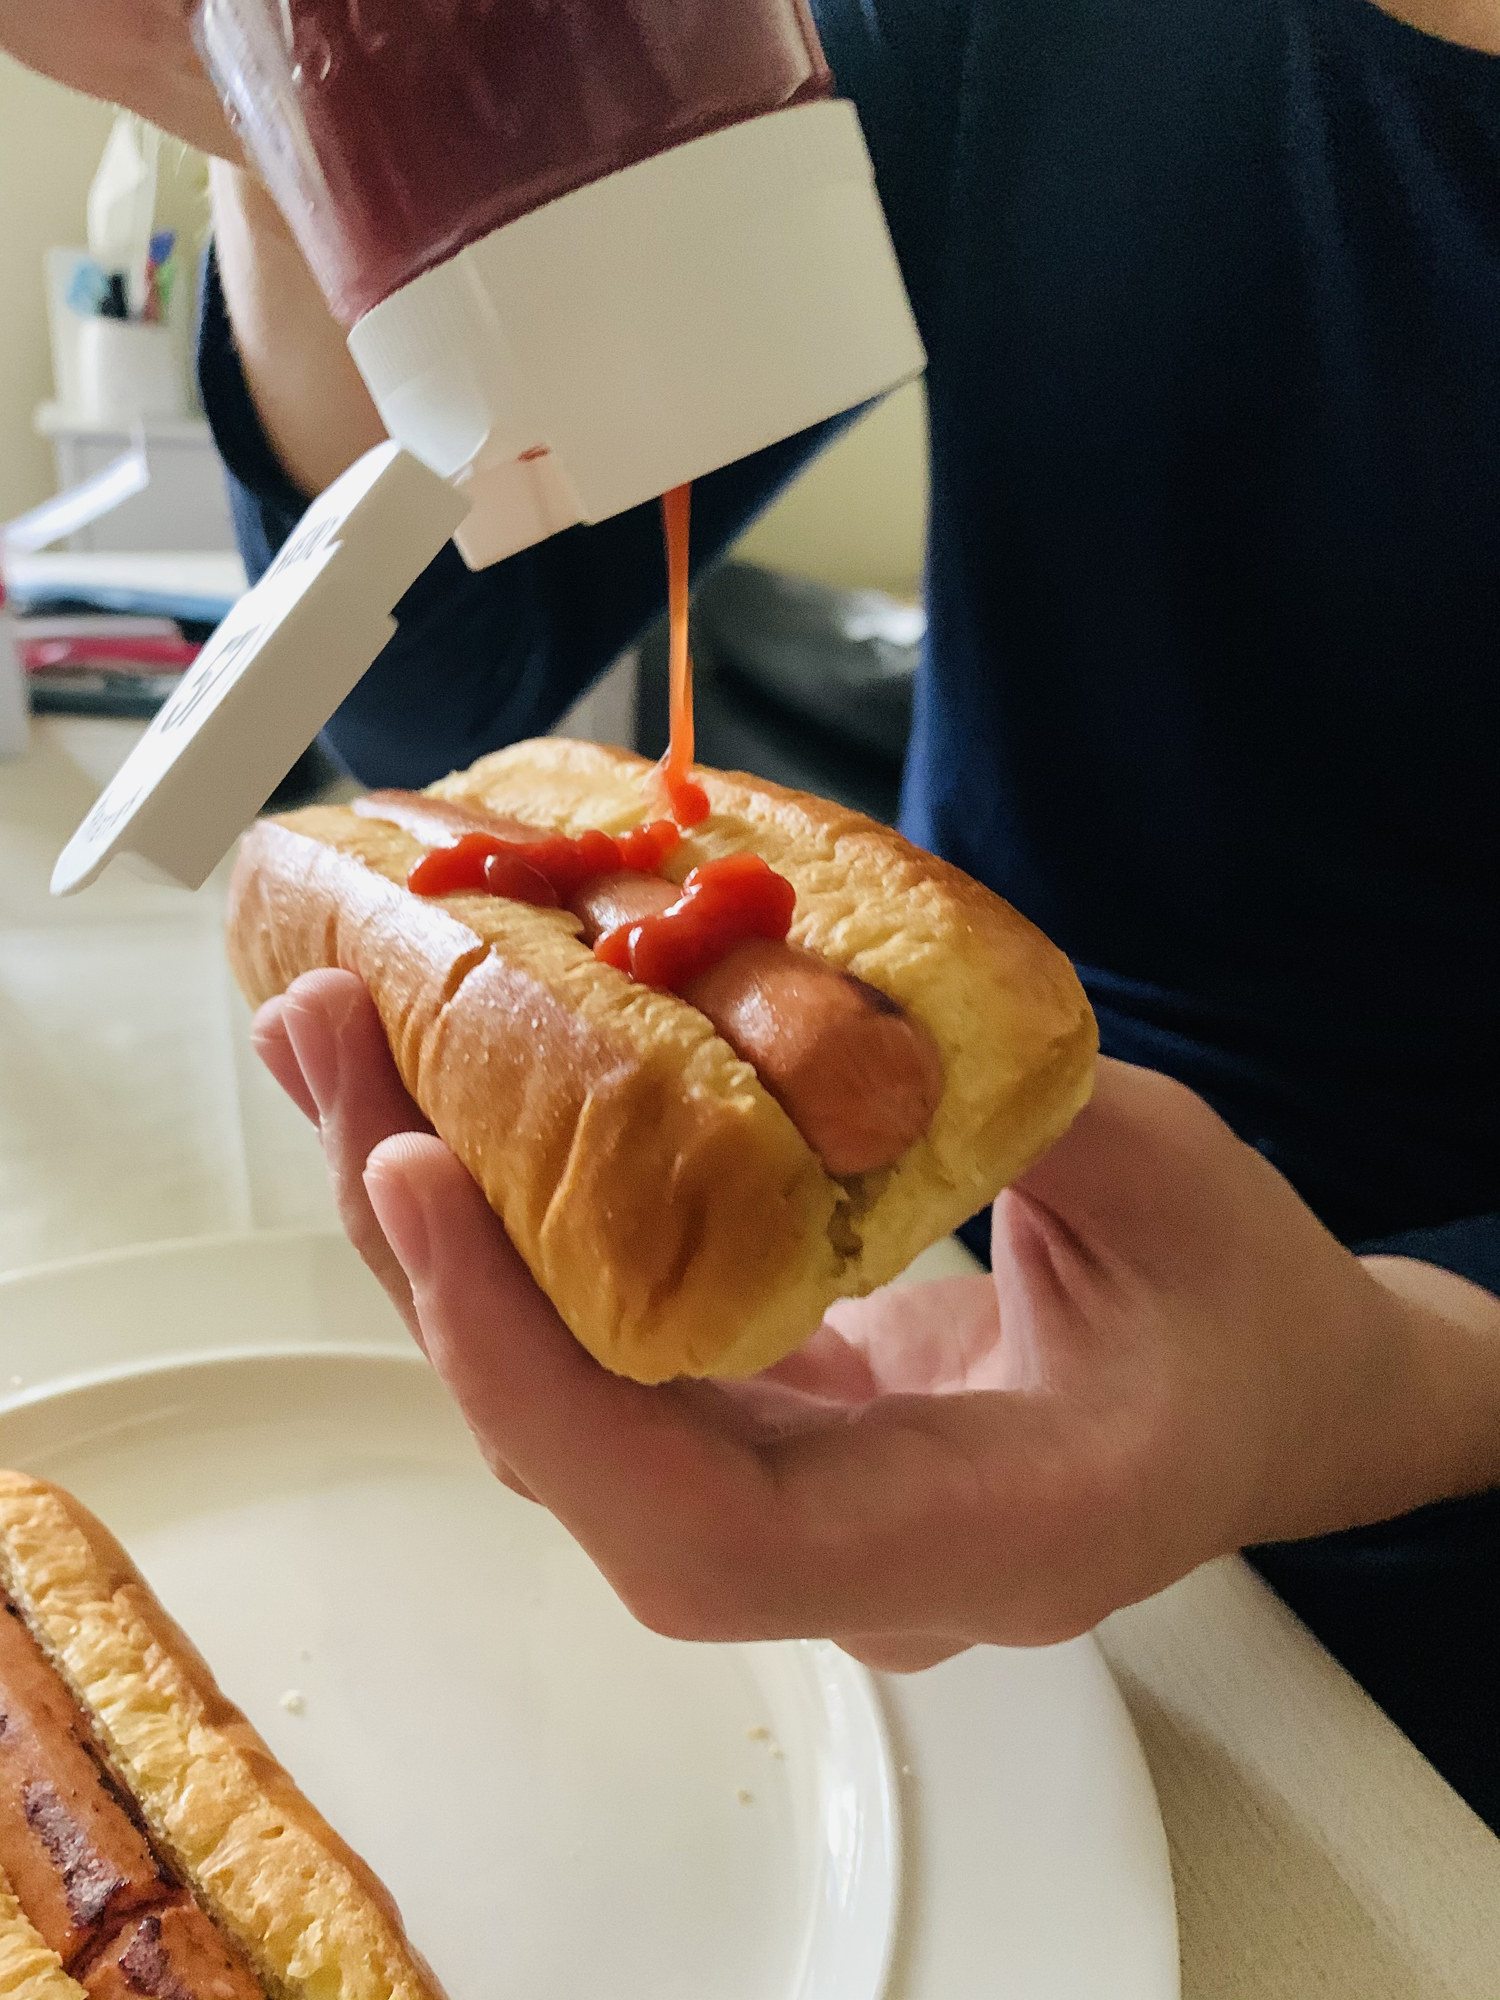 Squeezing ketchup on a hot dog